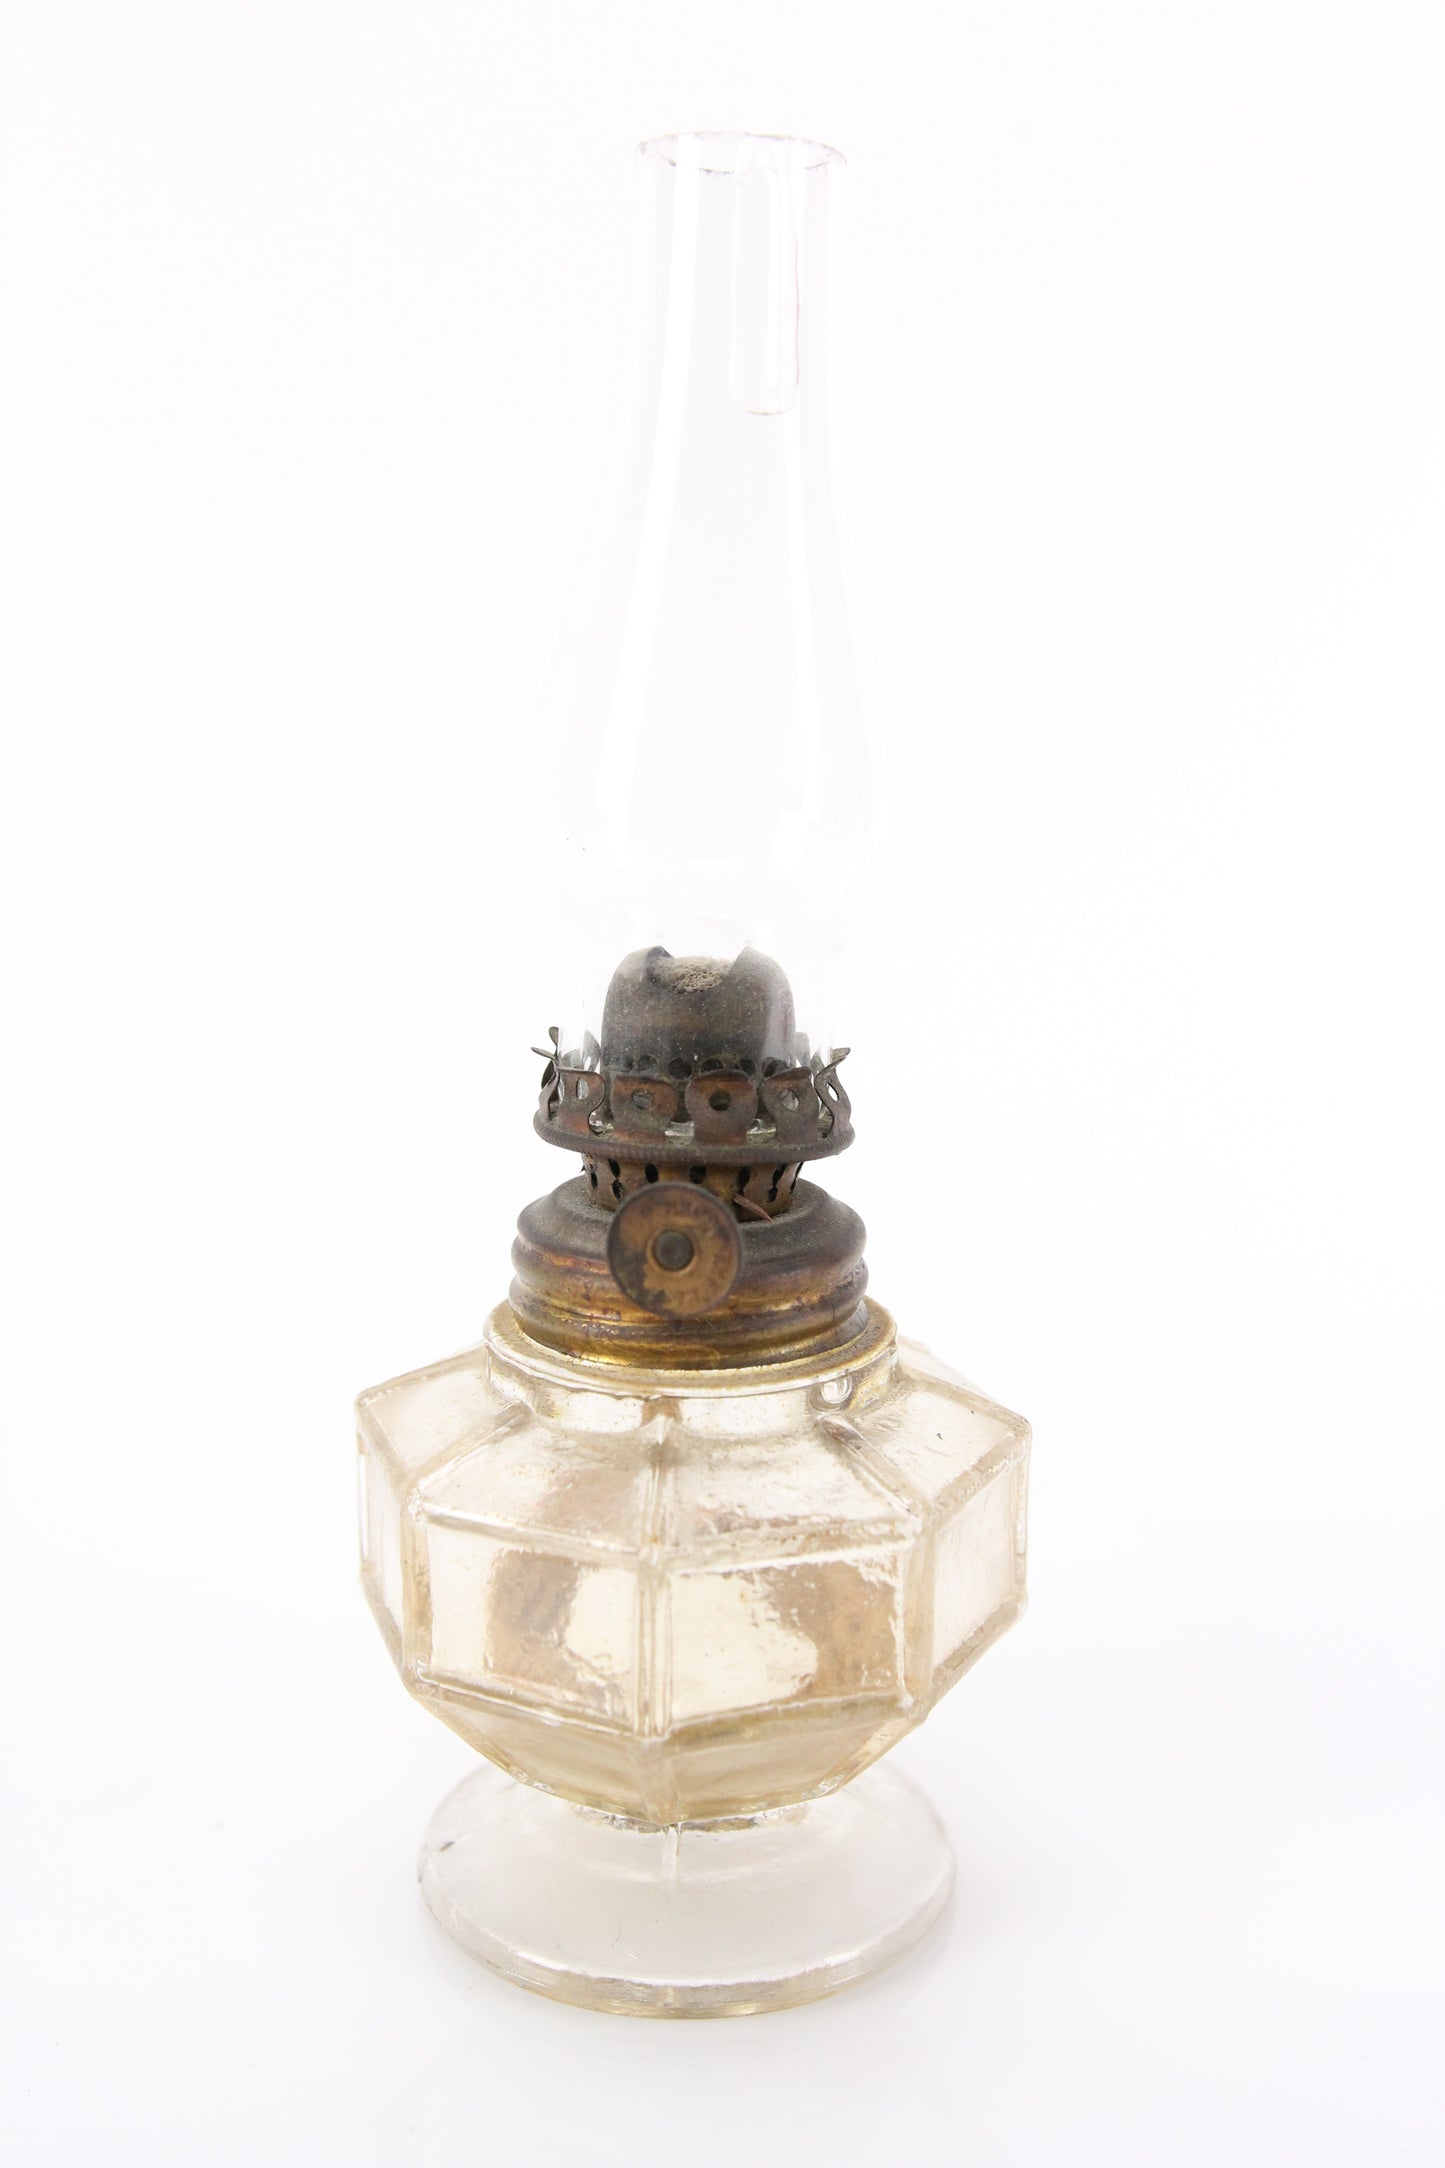 Antique Plume & Atwood Acorn Miniature Glass Oil Lamp with Chimney, 7"